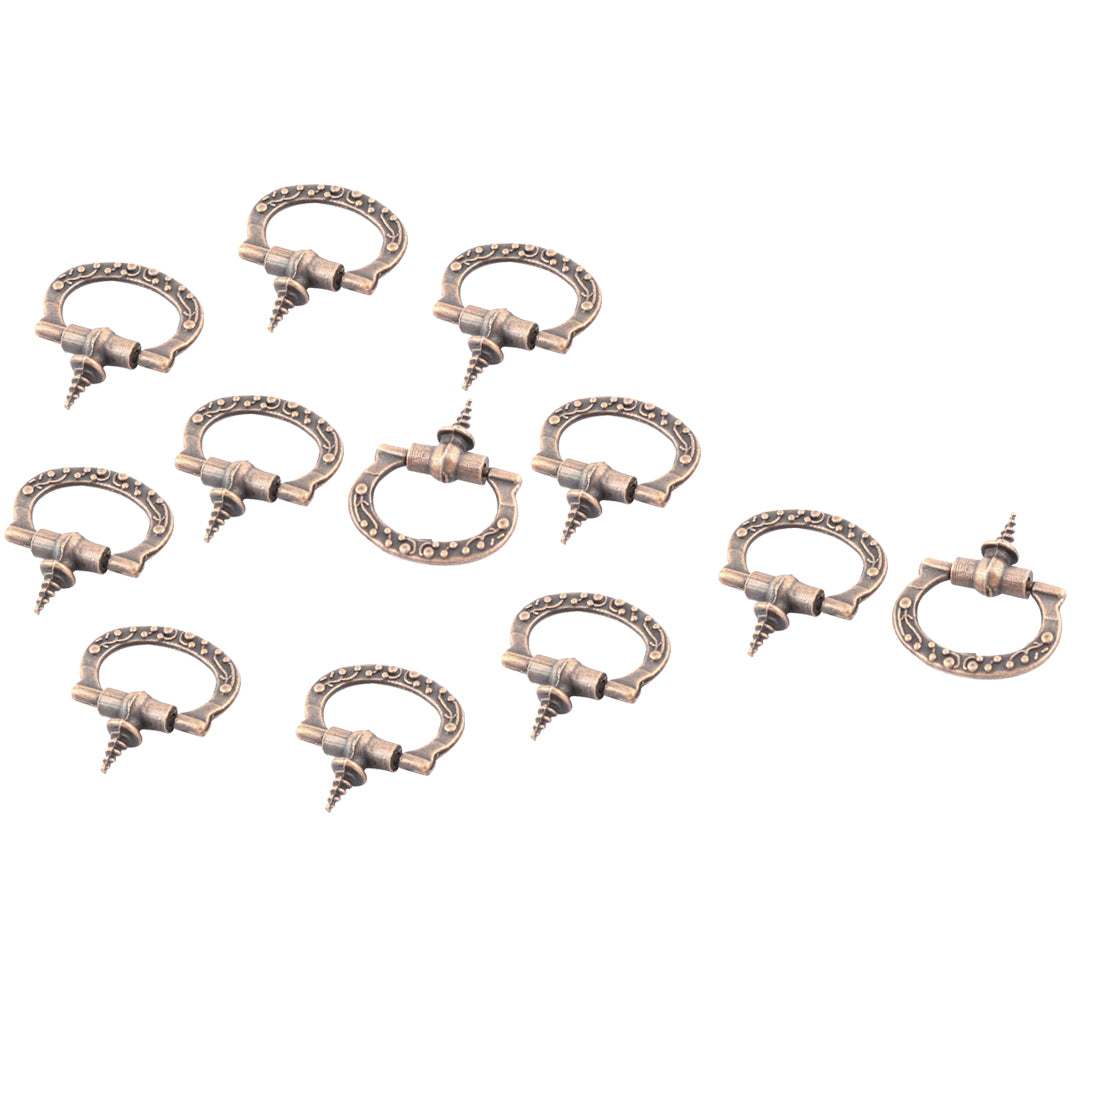 uxcell Uxcell Home Metal Dresser Door Jewelry Box Drawer Pull Handle Ring Knob 2mm Thread Dia 12 PCS